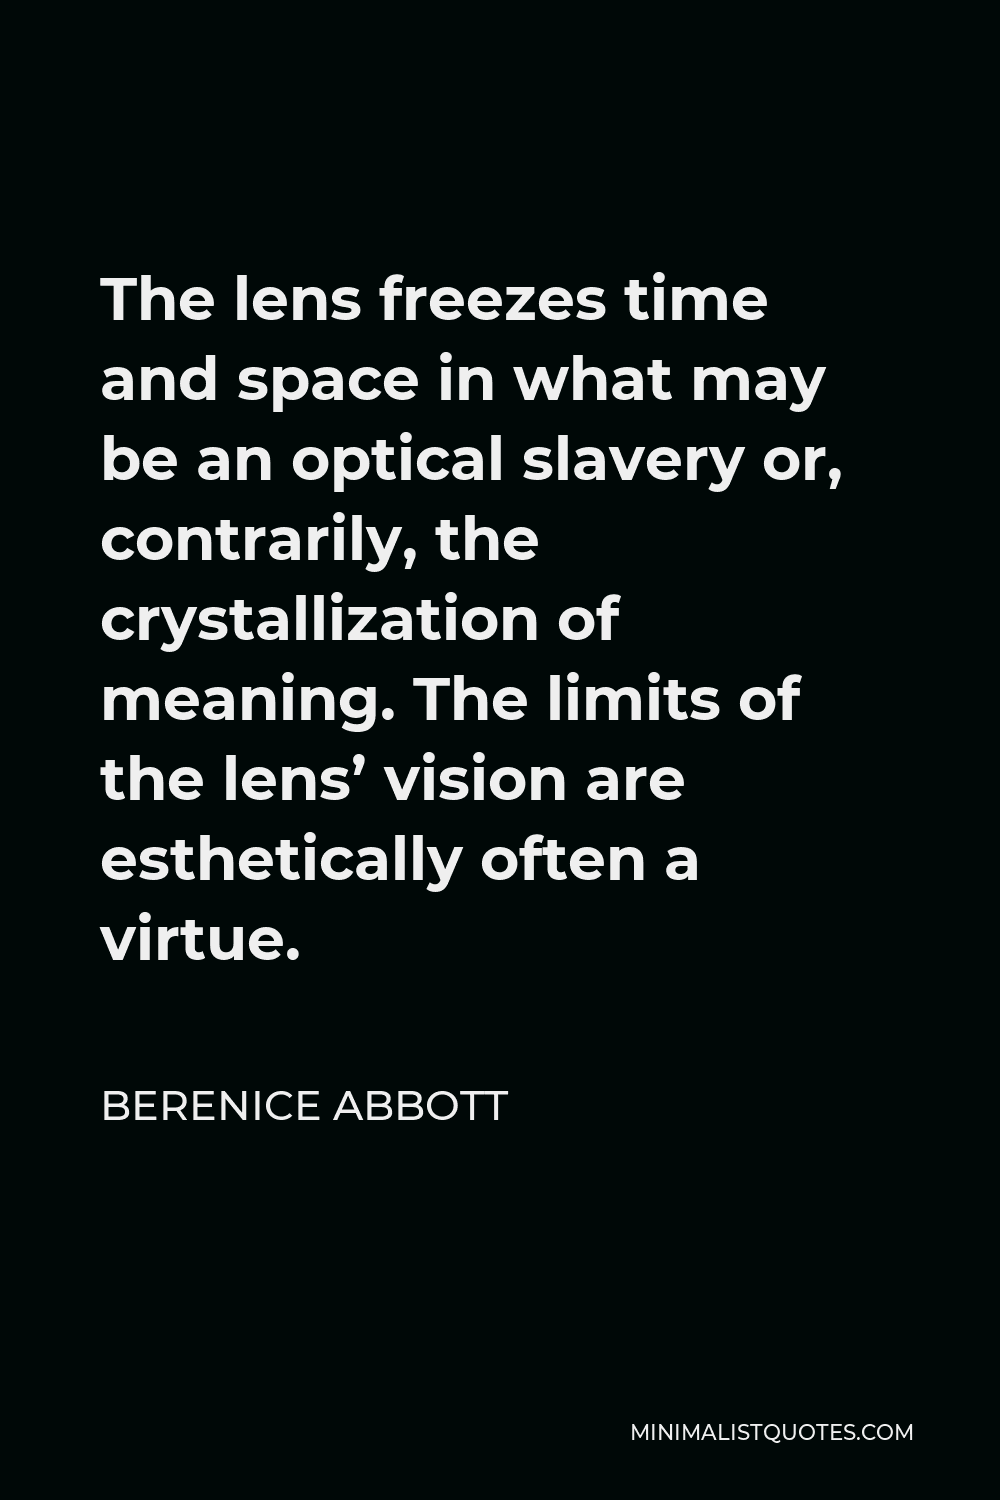 Berenice Abbott Quote - The lens freezes time and space in what may be an optical slavery or, contrarily, the crystallization of meaning. The limits of the lens’ vision are esthetically often a virtue.